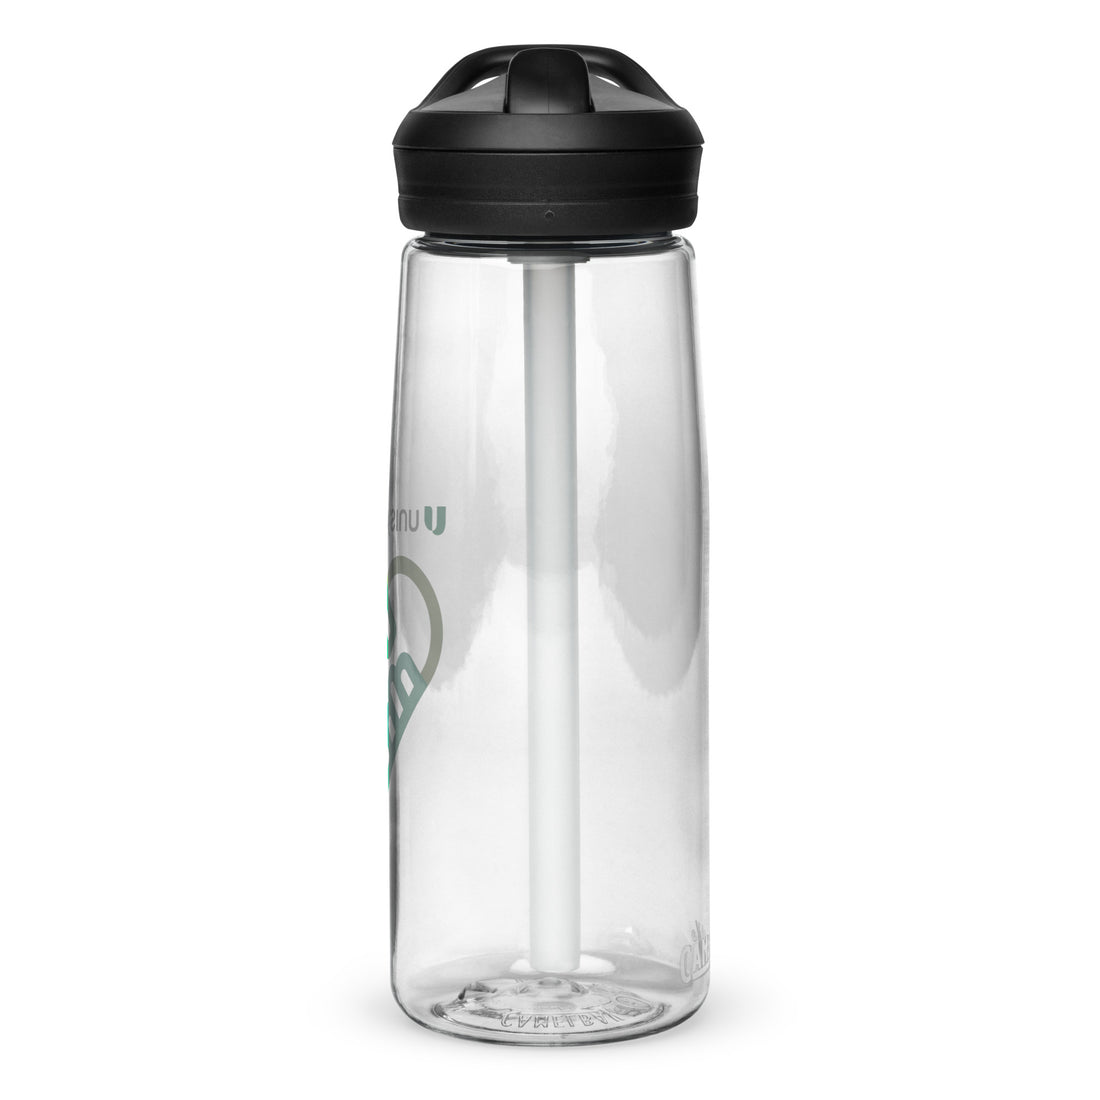 Unisys Cares Water Bottle